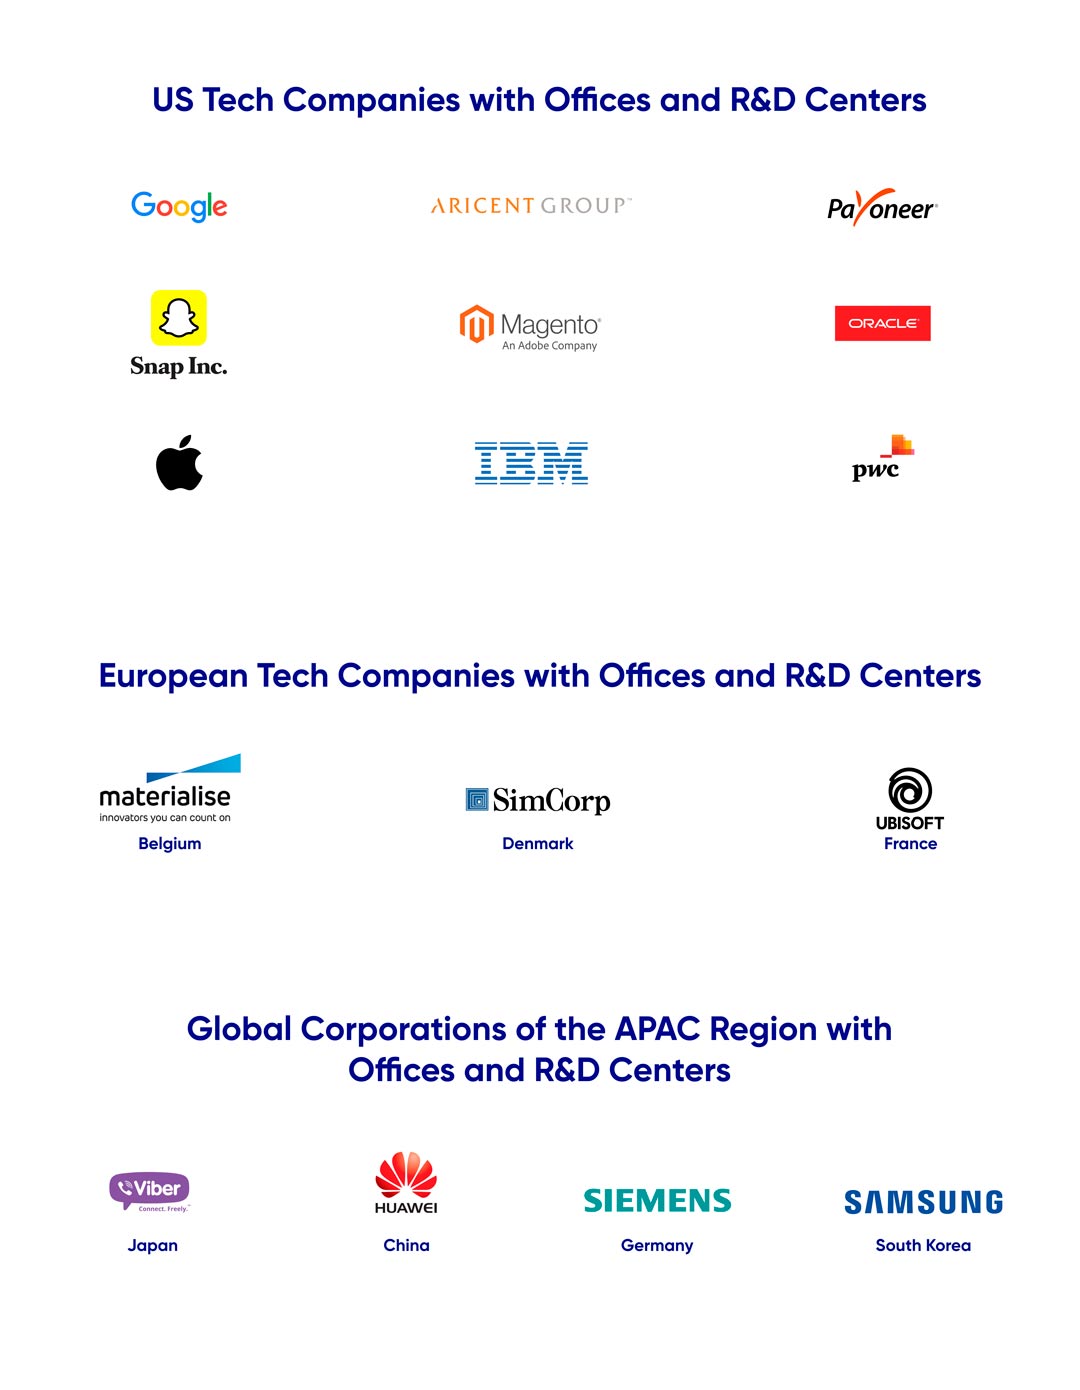 US, European, and APAC companies with Offices and R&D Centers in Ukraine